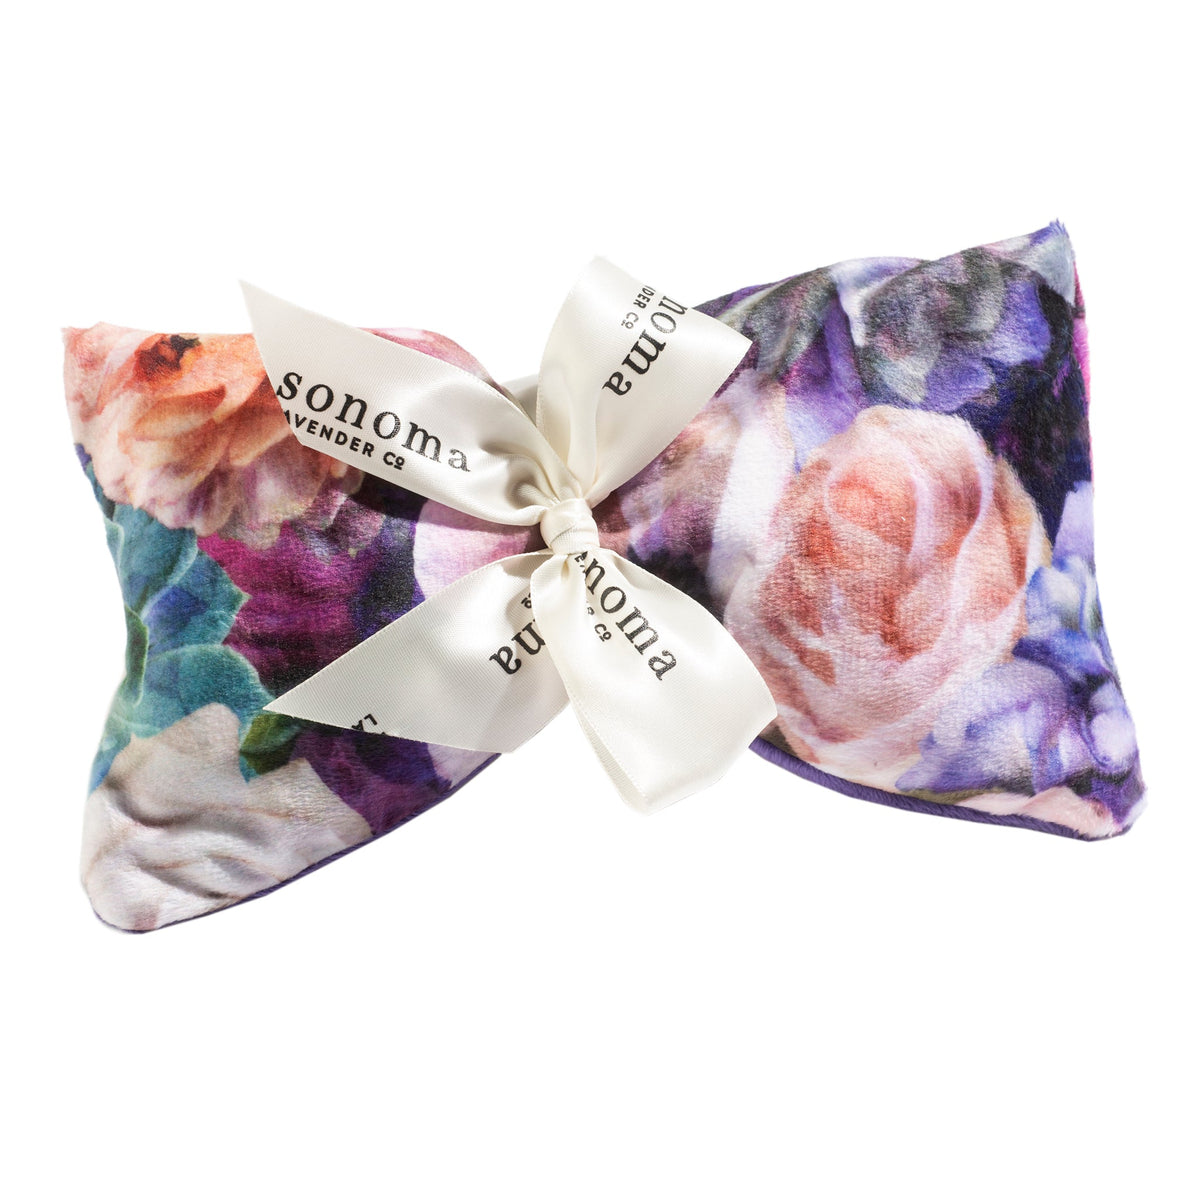 A floral-patterned aromatherapy Sonoma Lavender Peony Bouquet Spa Mask with a bow tied around it, displaying the text "Sonoma Lavender Co" on the ribbon. This heat therapy pillow features vibrant colors and a mix